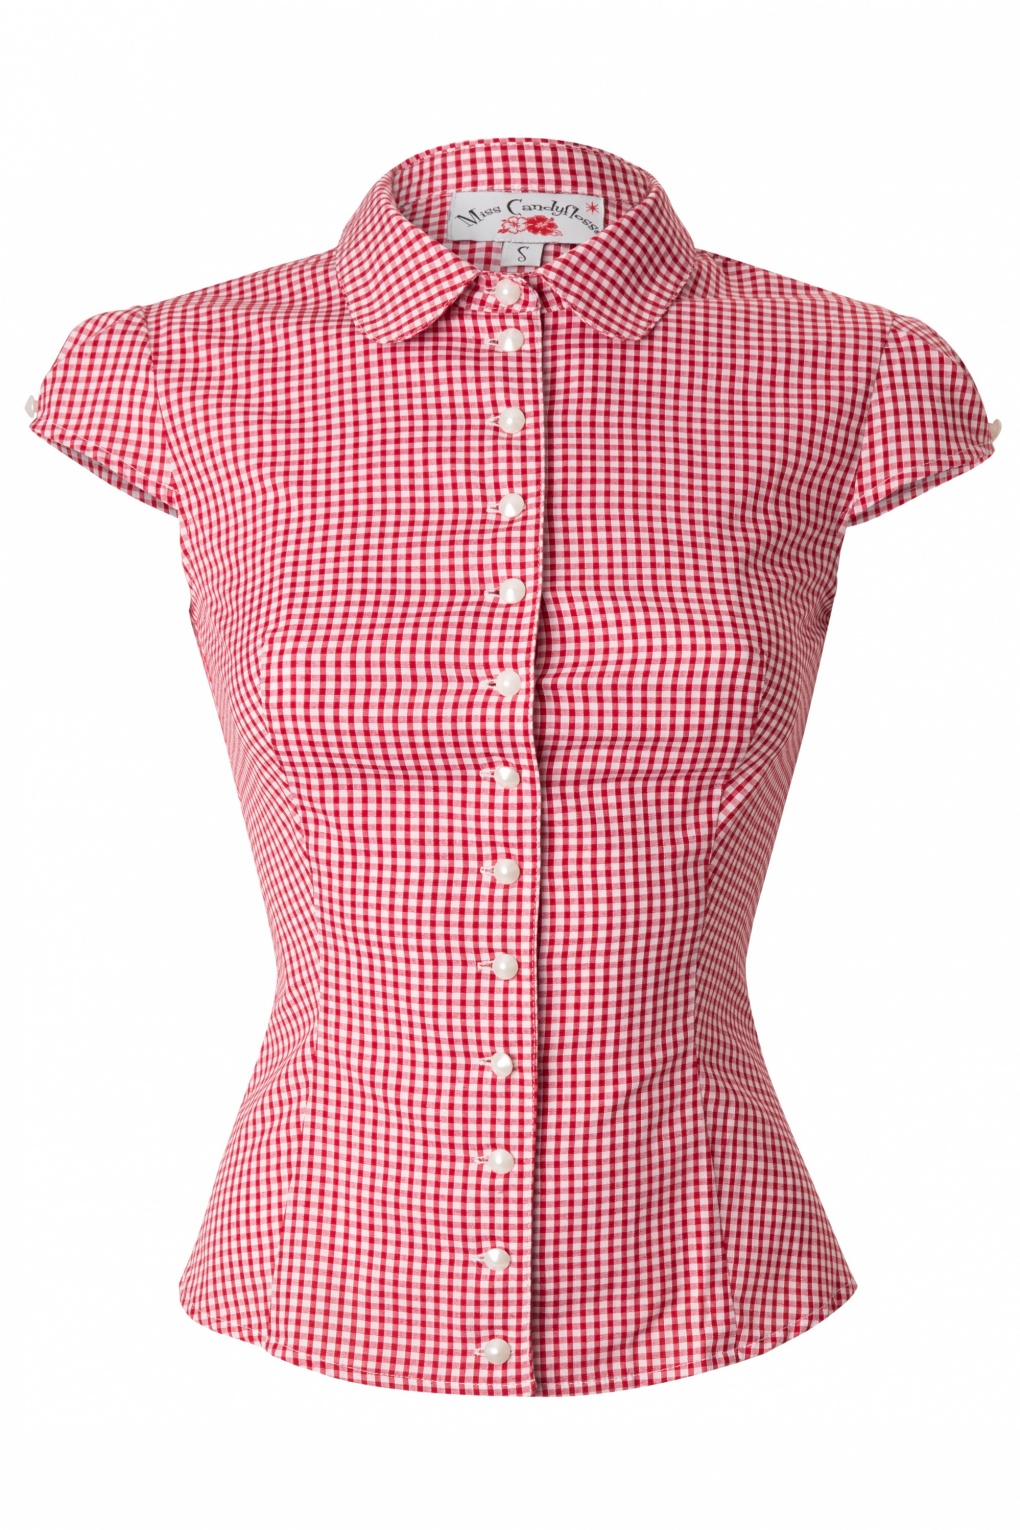 Jenilee Top In Red Gingham